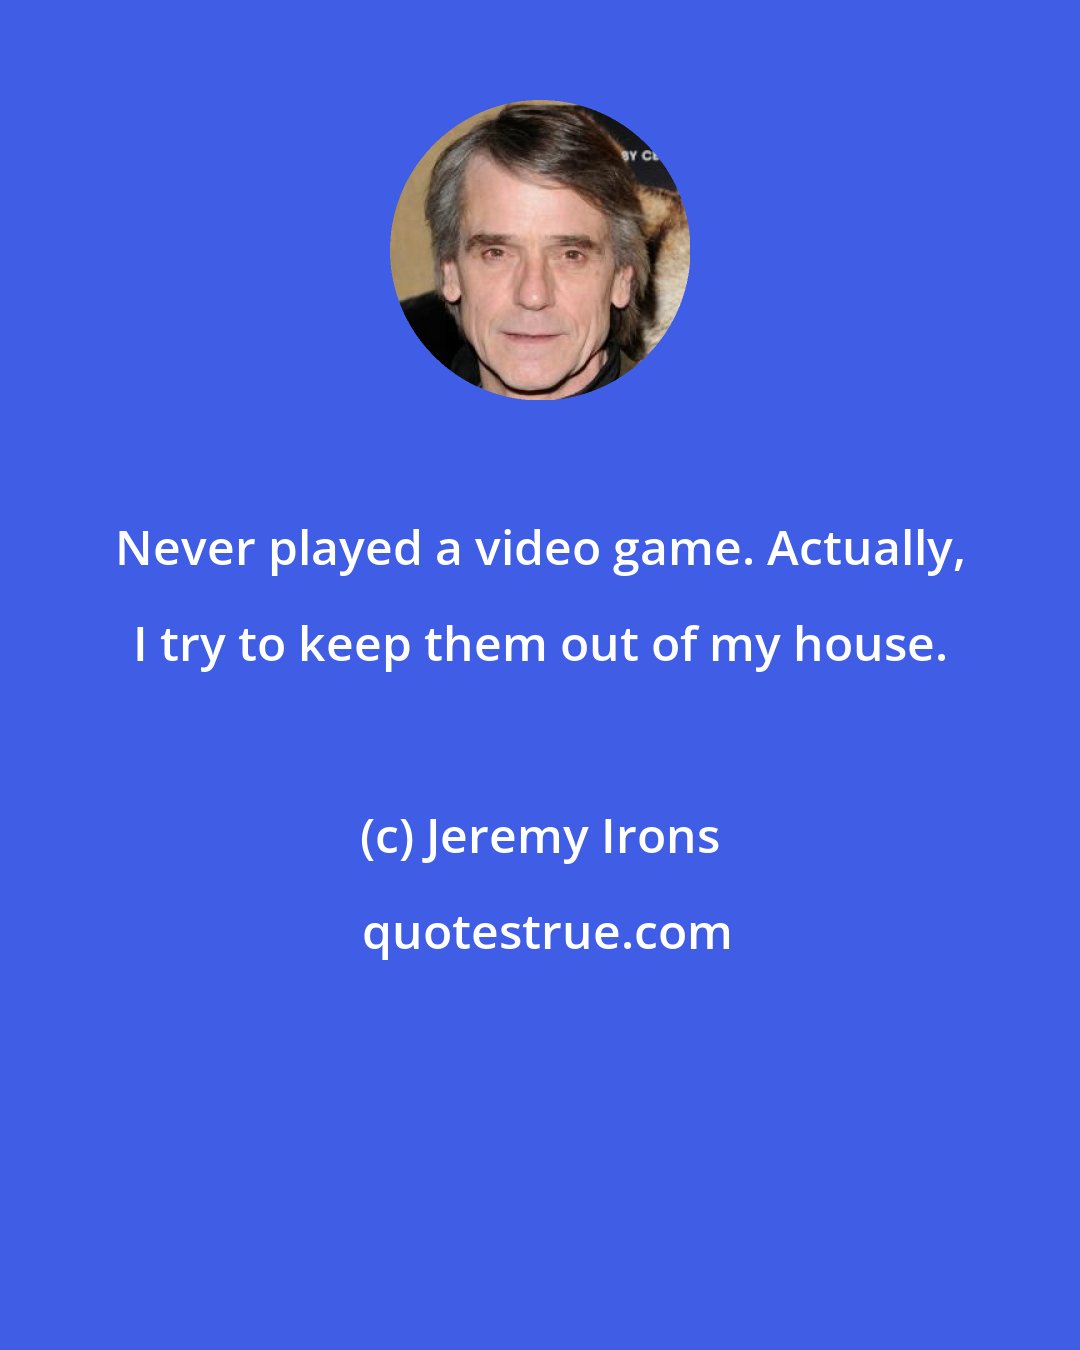 Jeremy Irons: Never played a video game. Actually, I try to keep them out of my house.